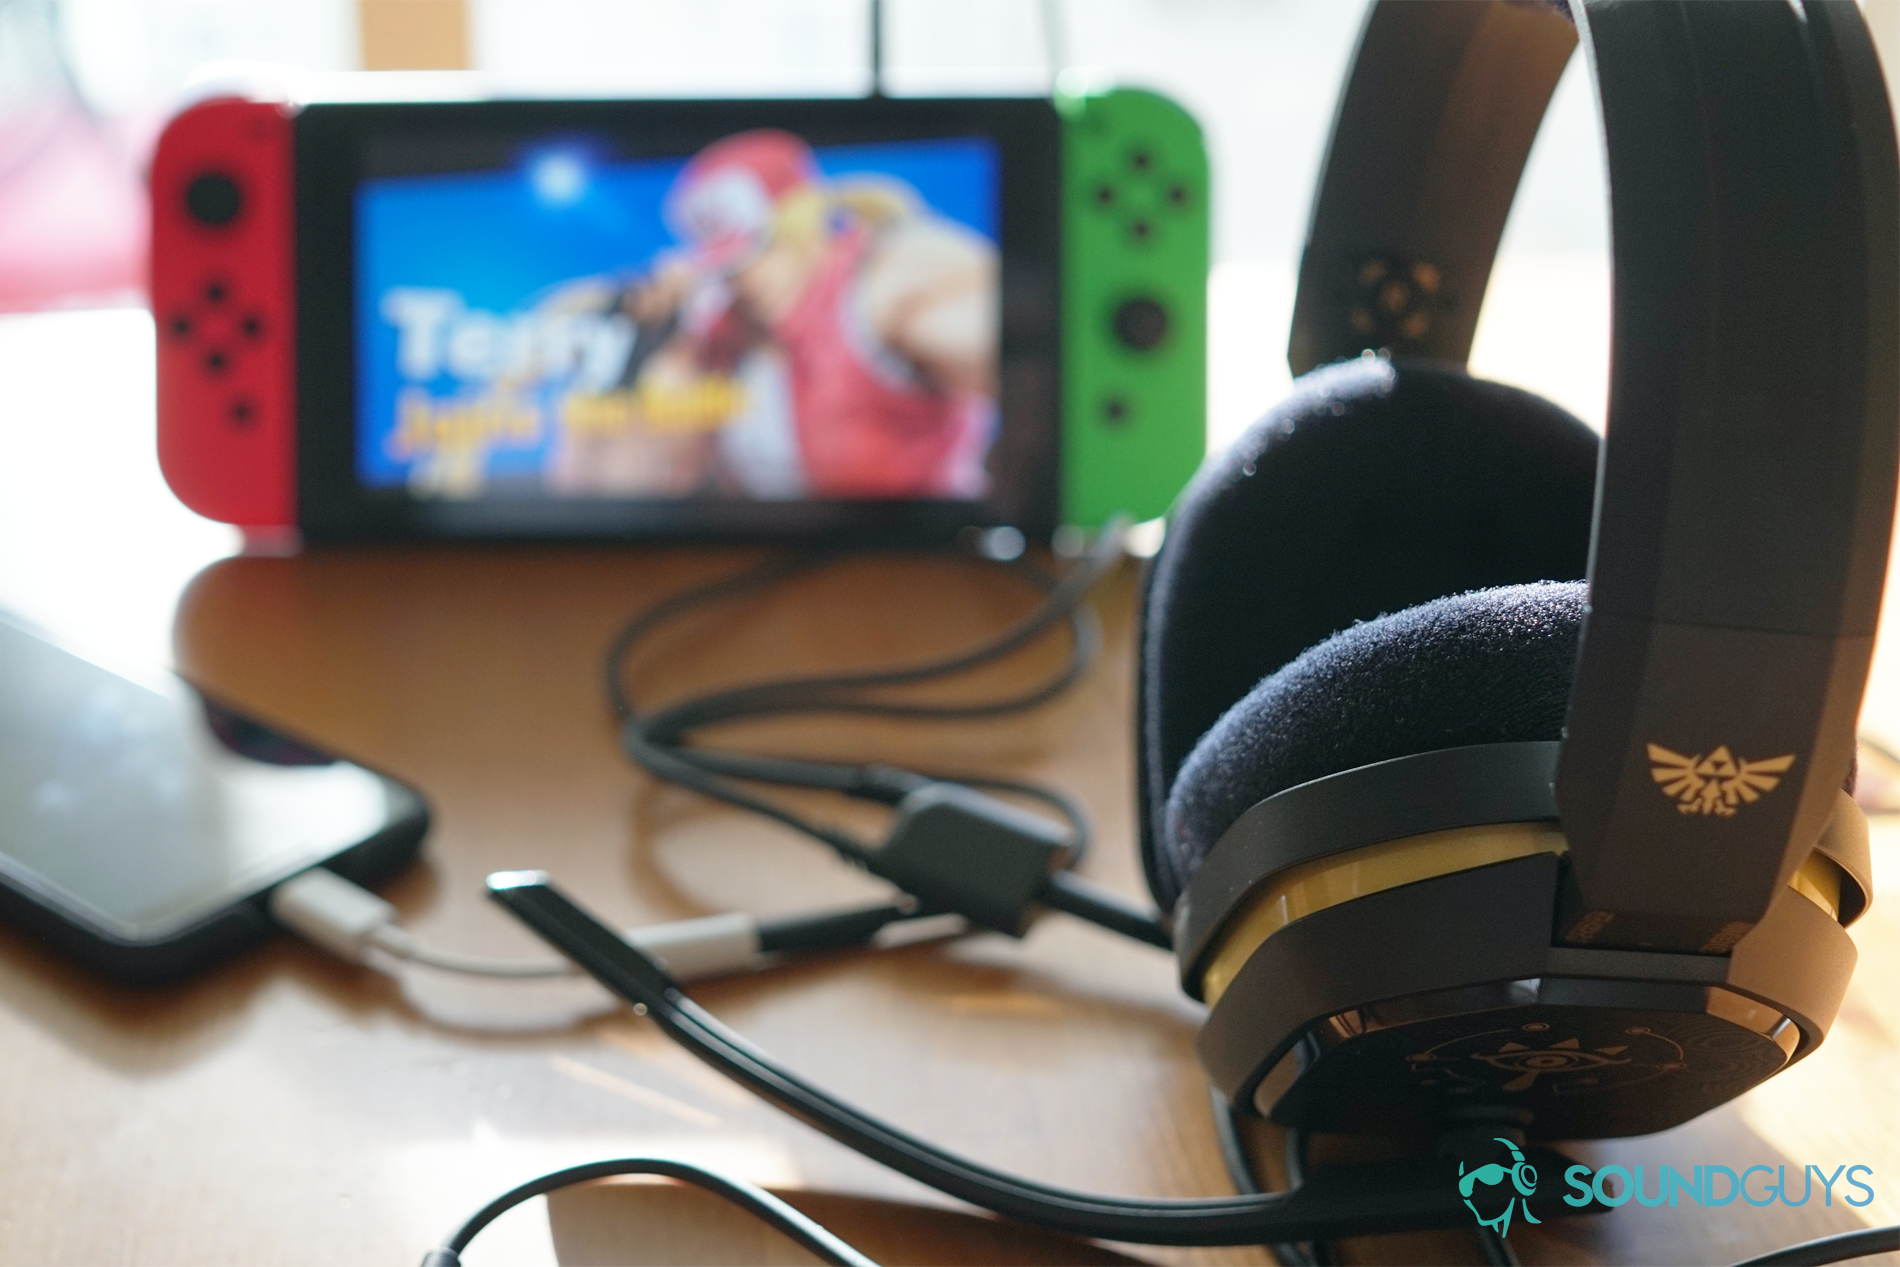 The Legend of Zelda Astro A10 sitting front of a Google Pixel 3 and a Nintendo Switch running Super Smash Bros. Ultimate, and all three are connected with the included splitter cord.